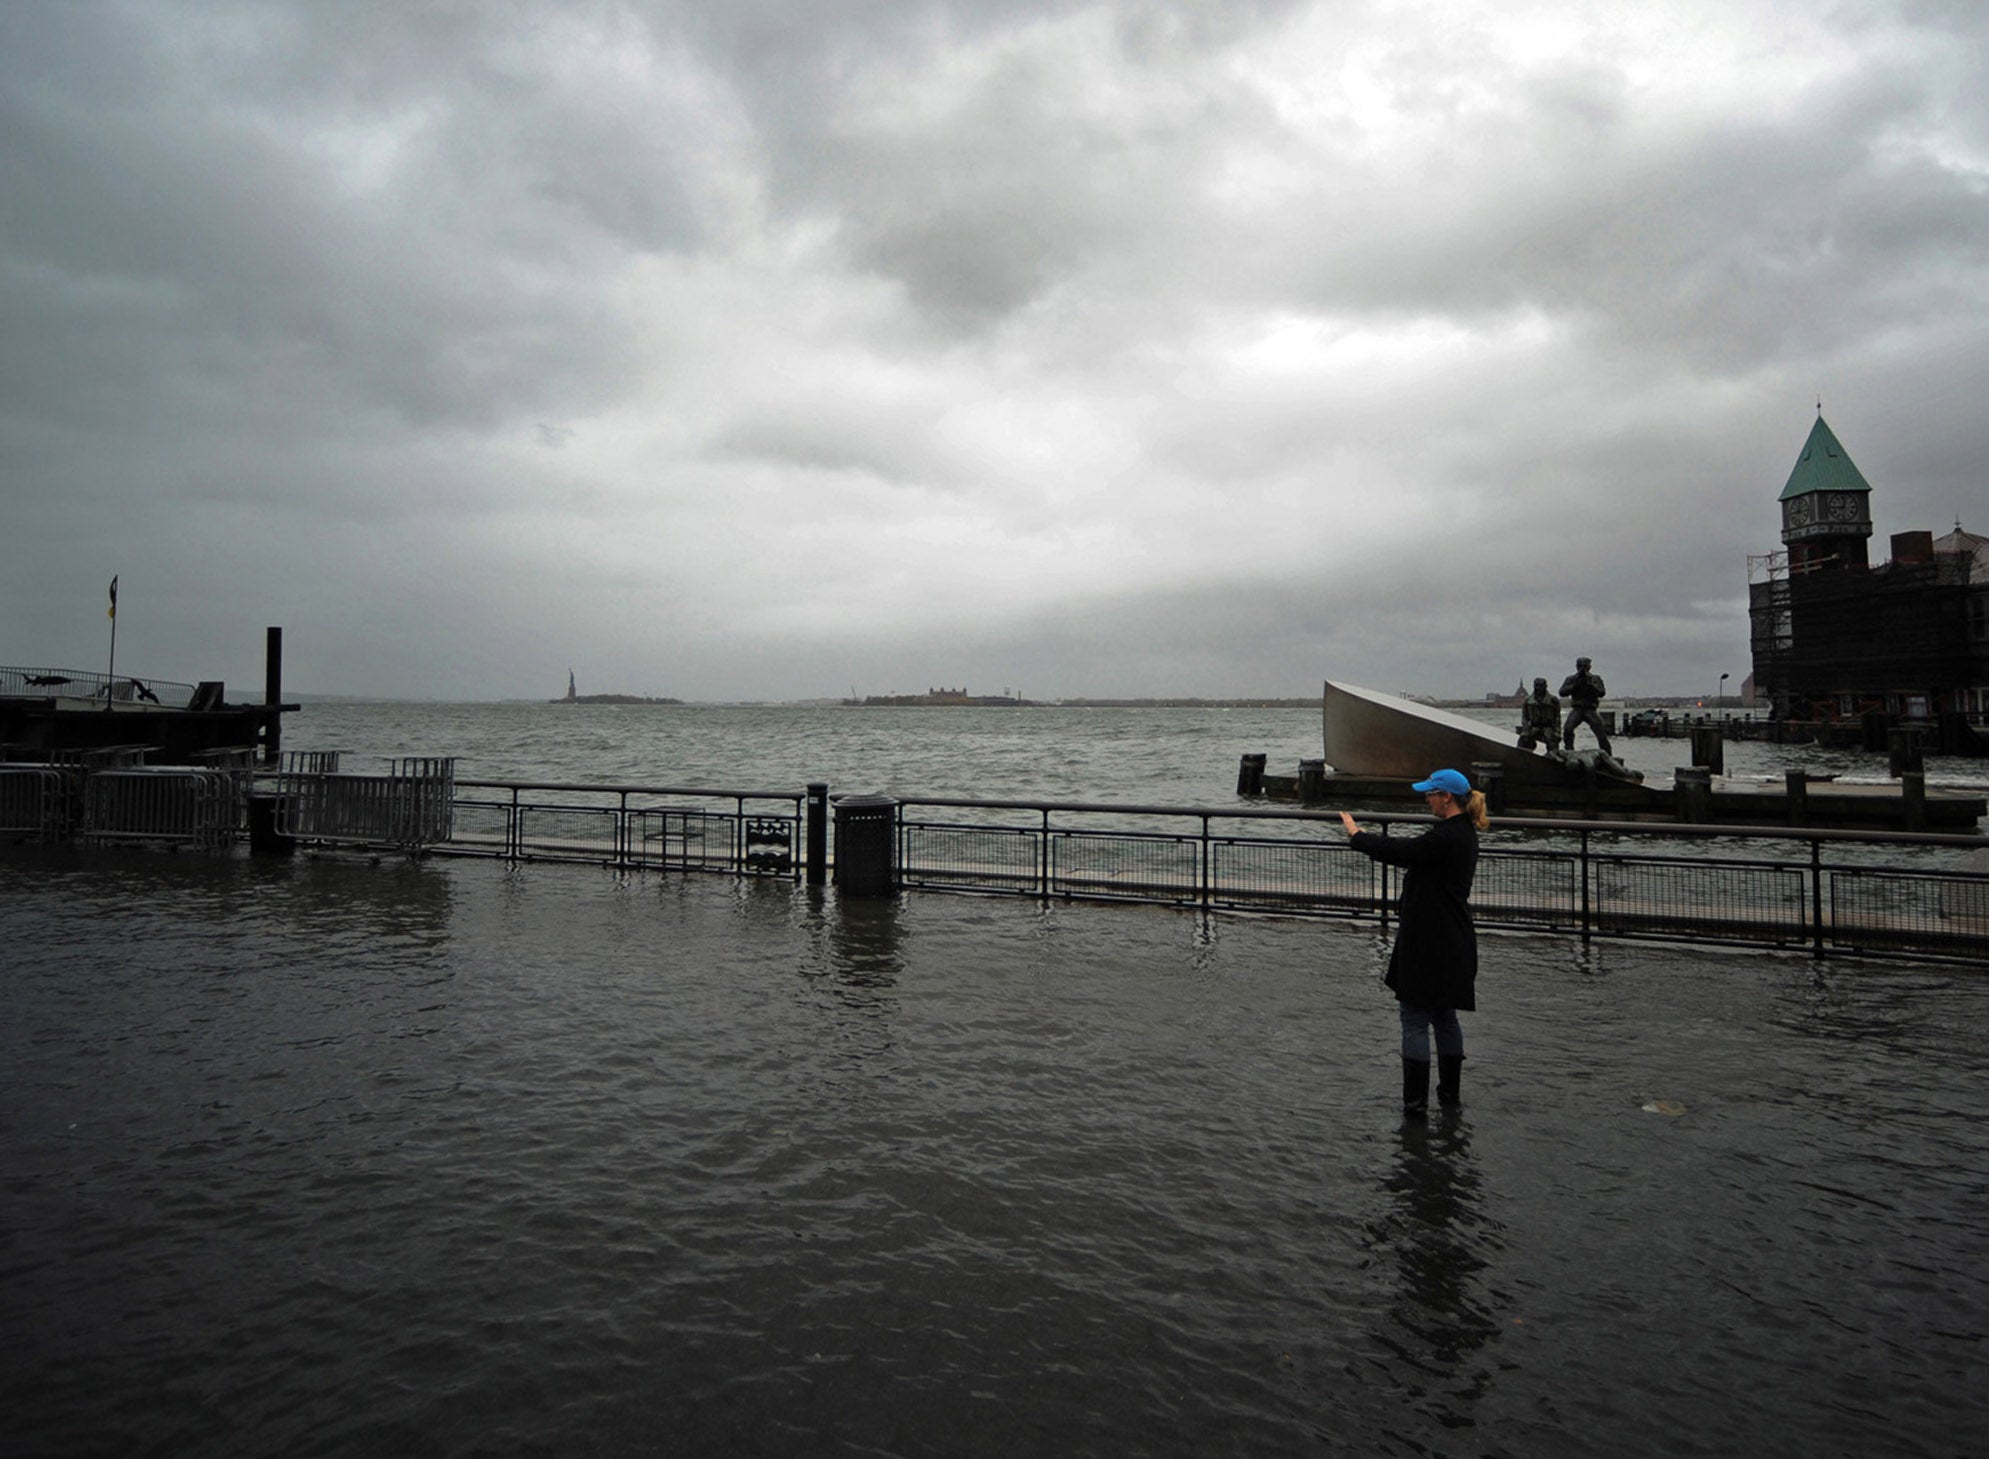 STORM DIKES: A woman takes a picture of a flooded area of Battery Park in New York on Oct. 29. With most scientists suggesting climate change is increasing the frequency of devastating storms, the cost-benefit ratio of building a surge-protection system m